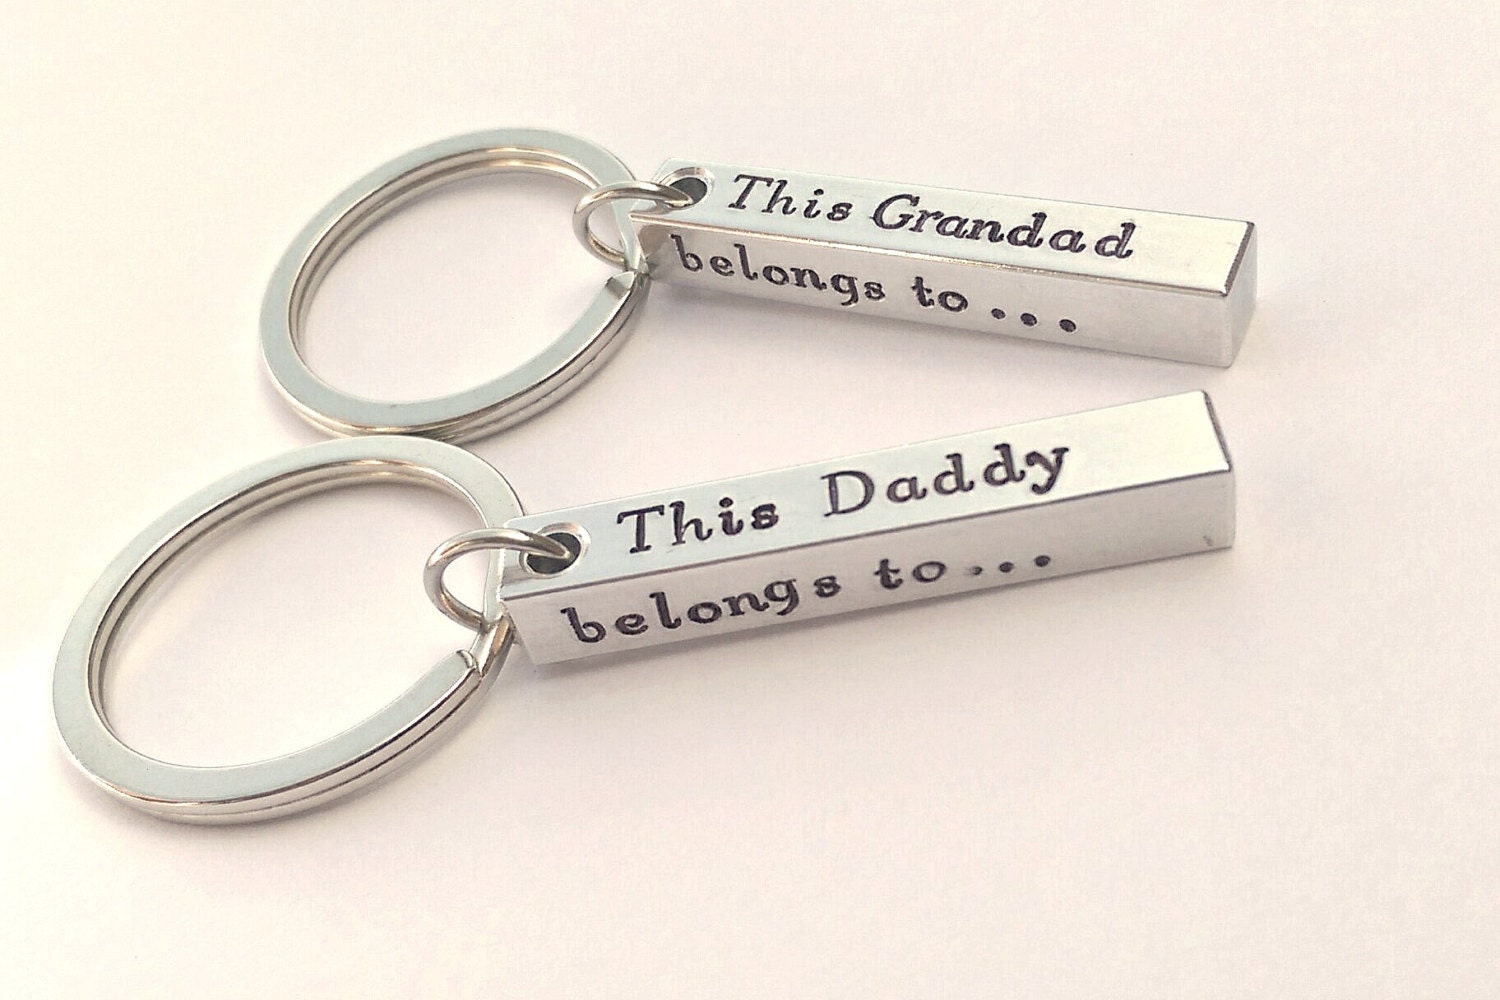 Personalised fathers day gift - personalised Daddy keyring - personalised dad gift - personalised gift for him - grandad gift - uncle gift